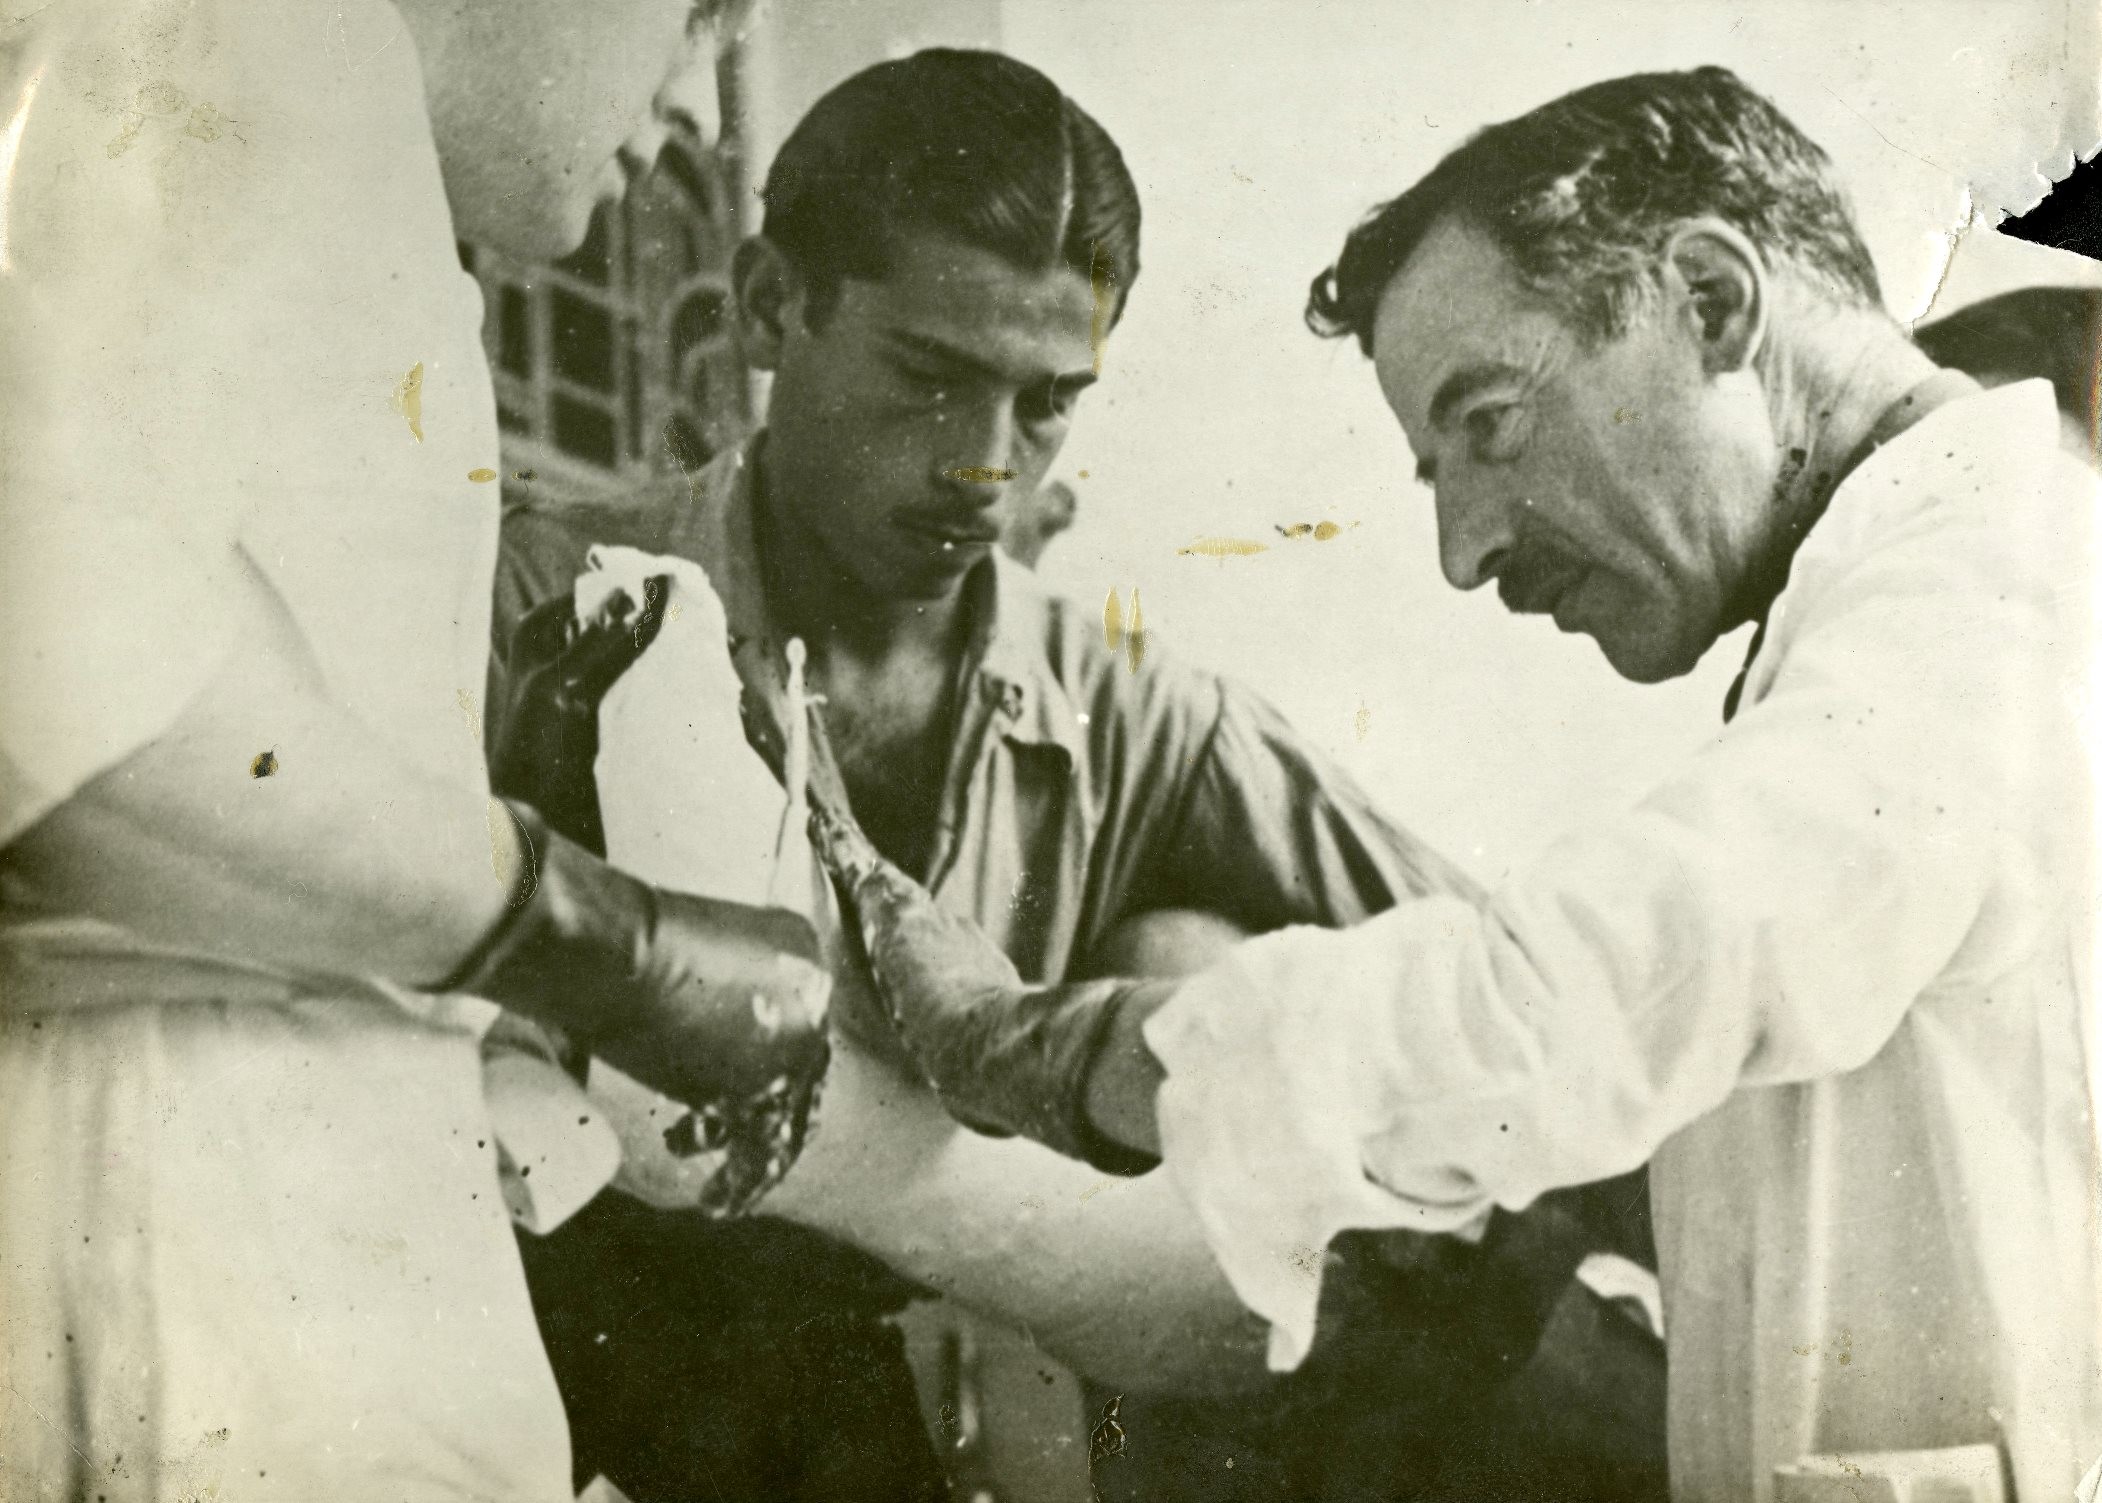 Dr Leo Eloesser (right) operating on a patient in Spain in 1937, at the height of the Spanish civil war. Picture: courtesy of the Tamiment Library, New York University